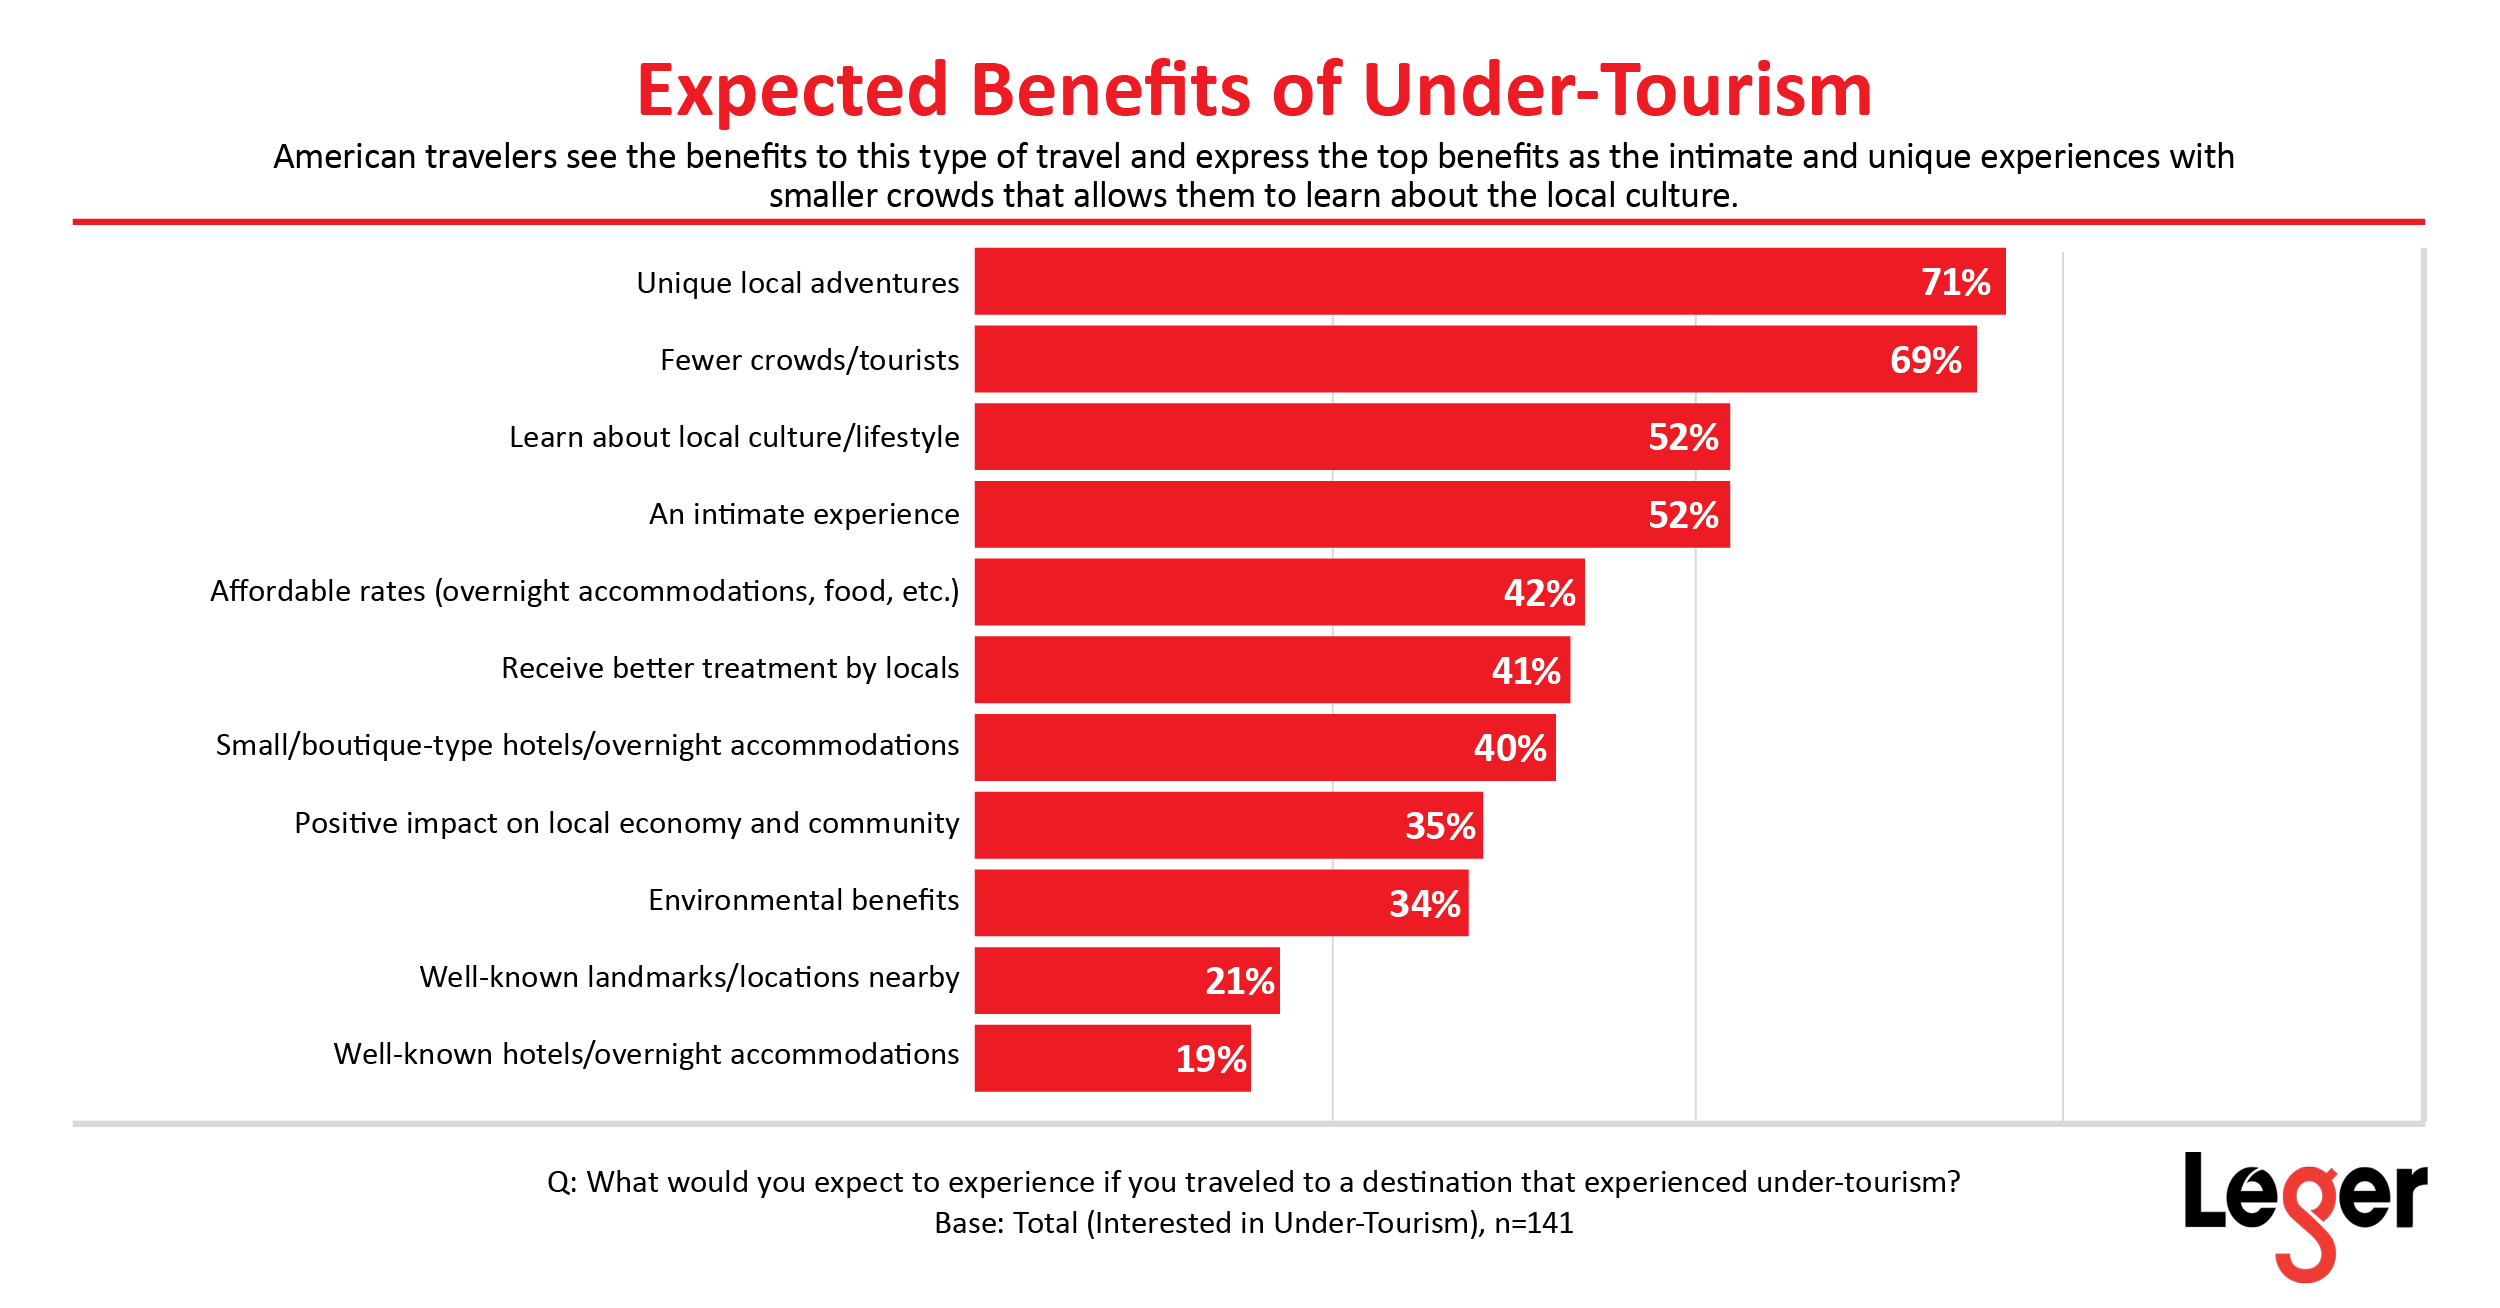 Expected benefits of under-tourism